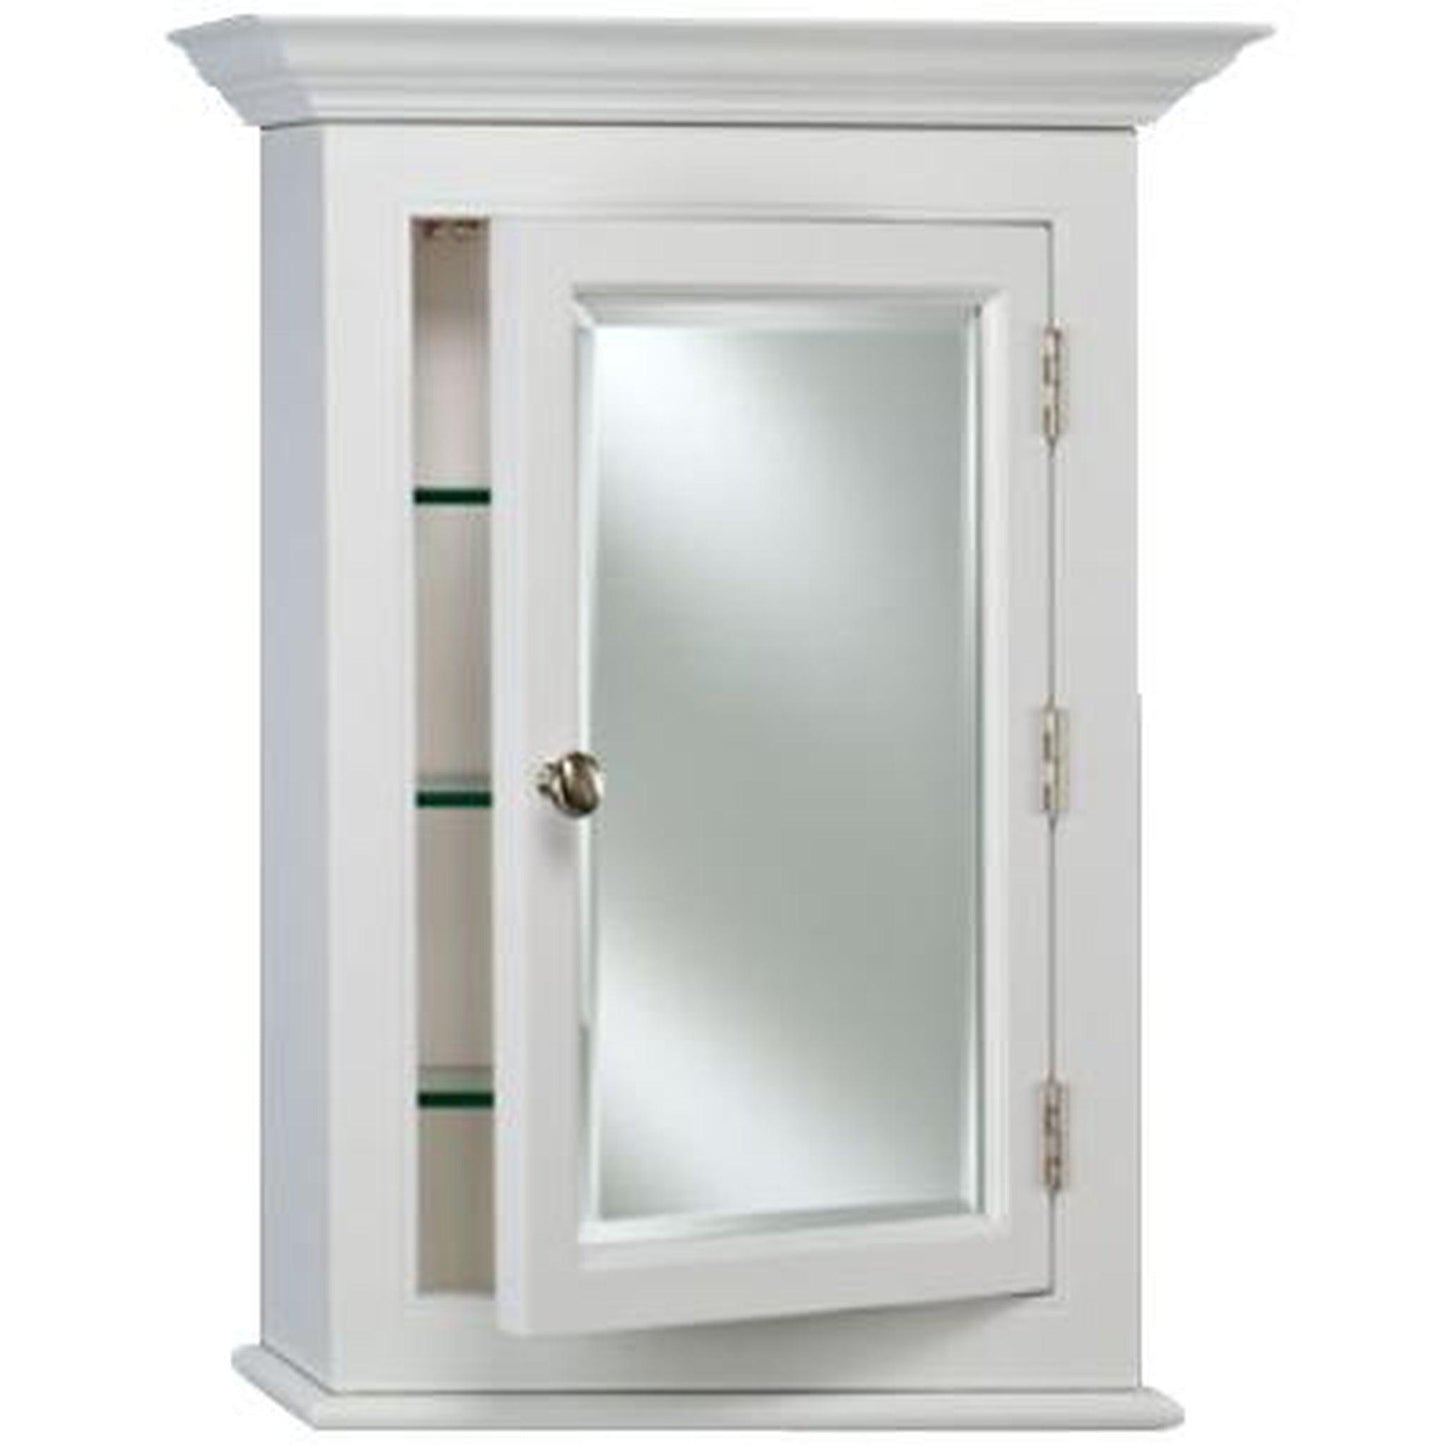 Afina Wilshire II Small White Semi-Recessed Right Hinged Single Door Medicine Cabinet With Beveled Edge Mirror